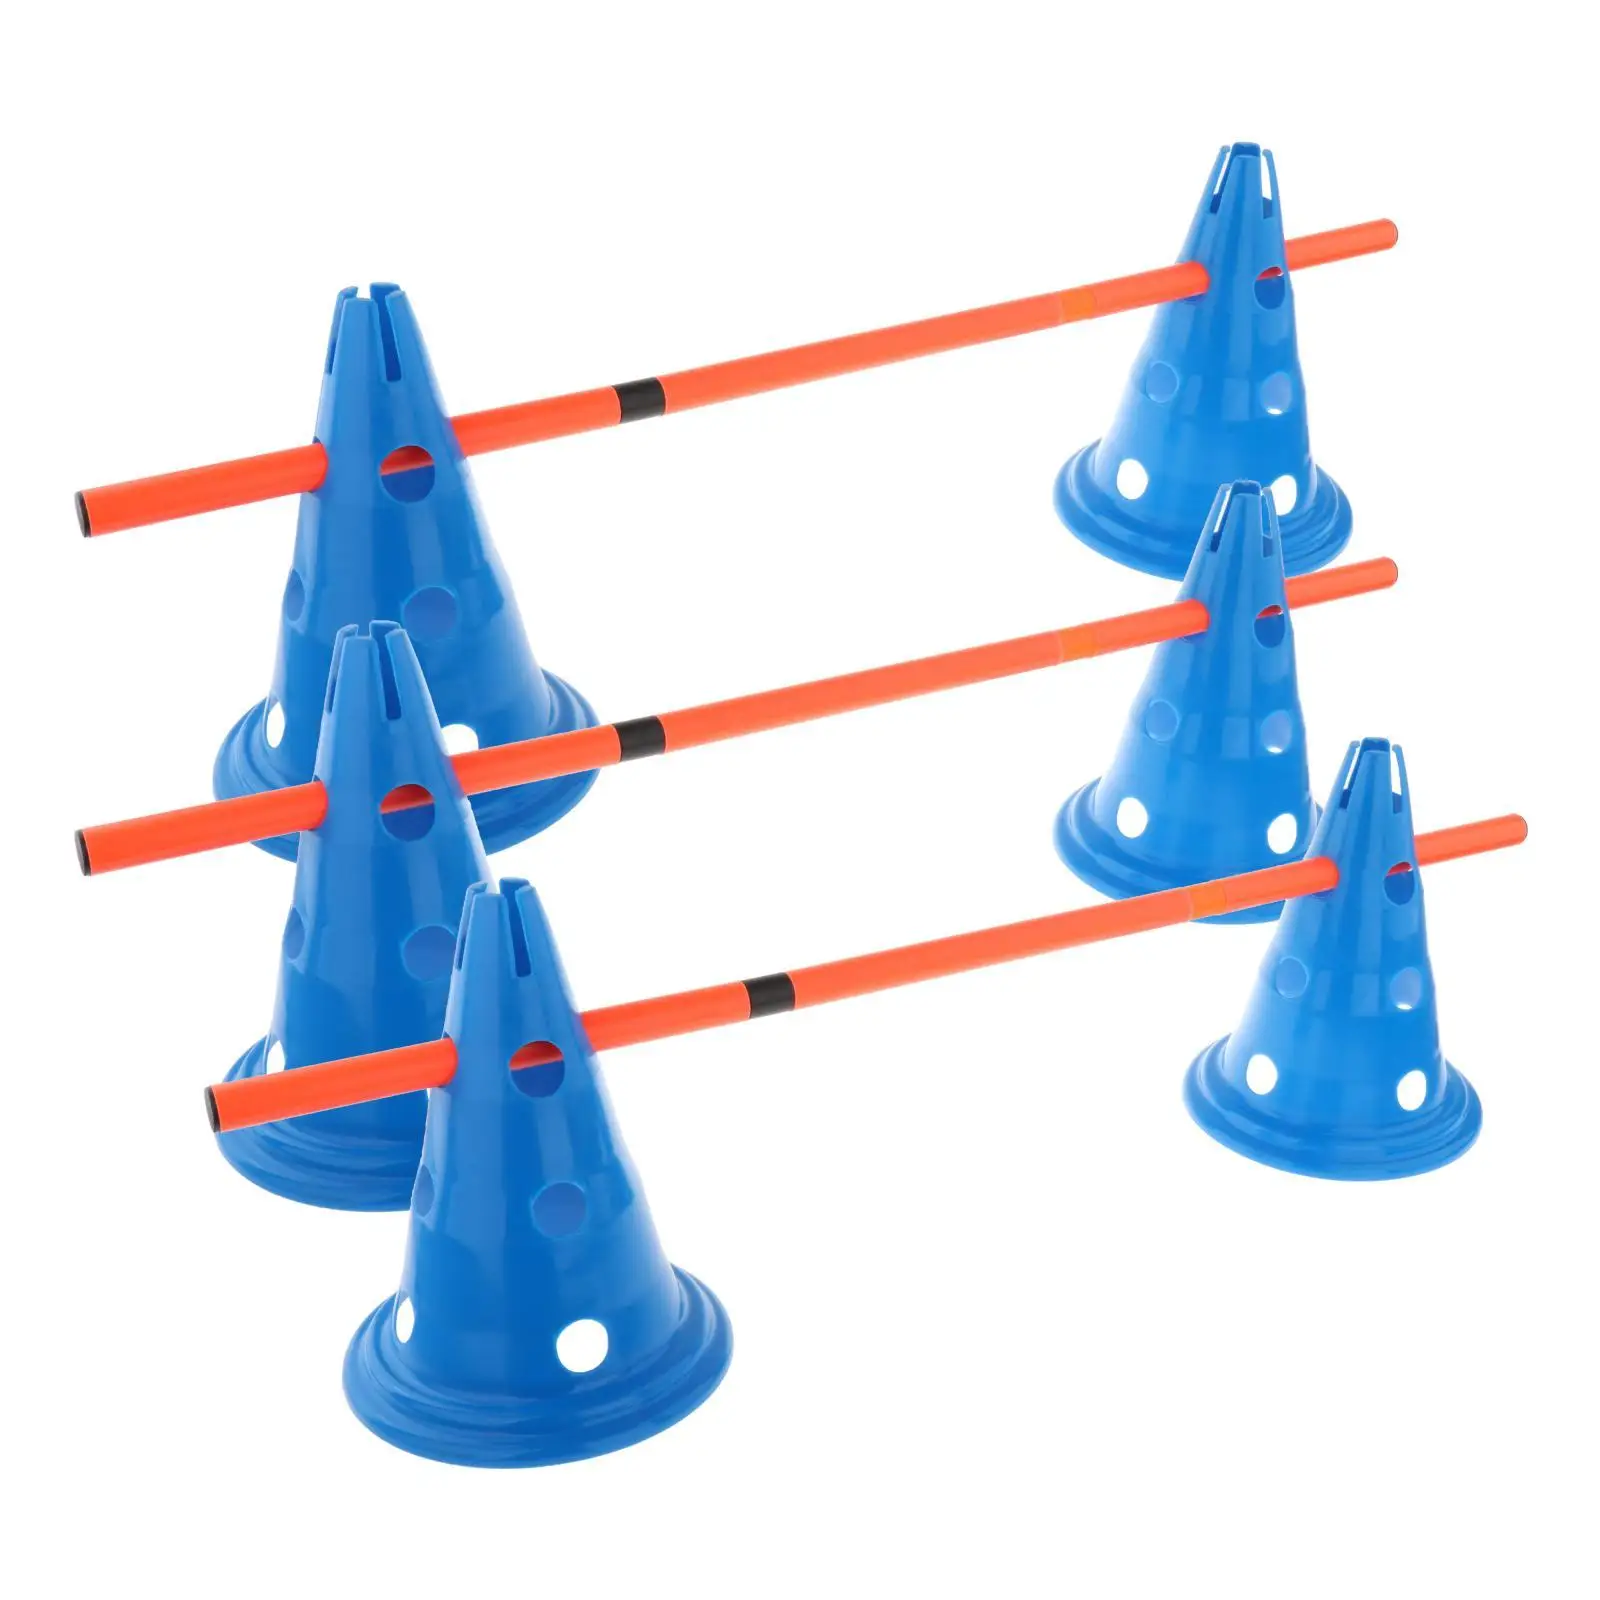 Hurdle Cones Course Interactive Exercise Cones for Soccer Football Training